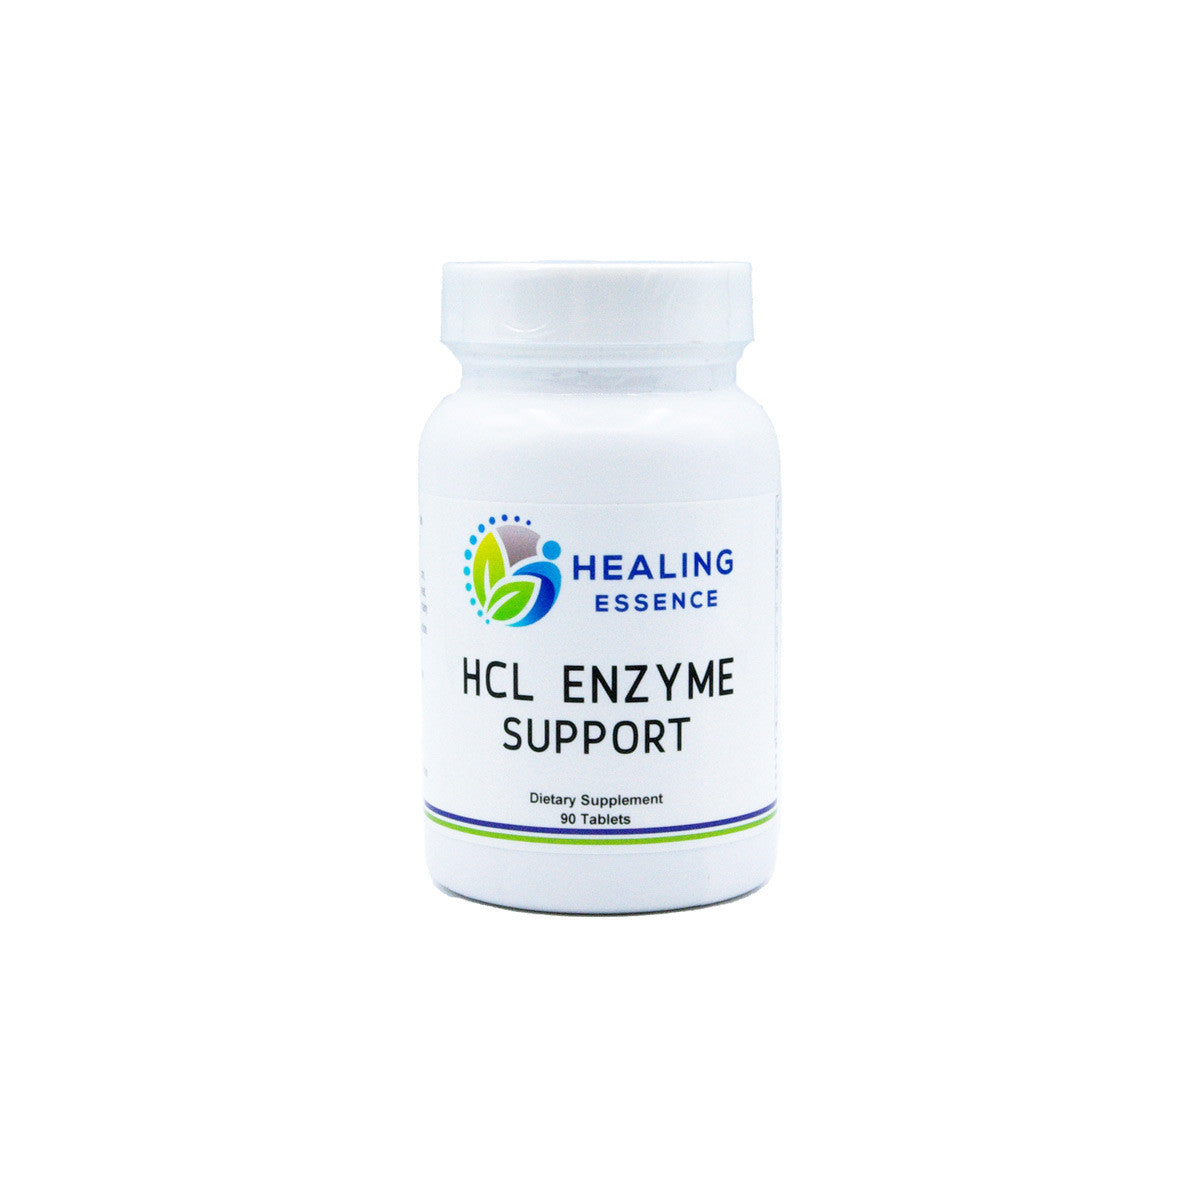 HCL Enzyme Support